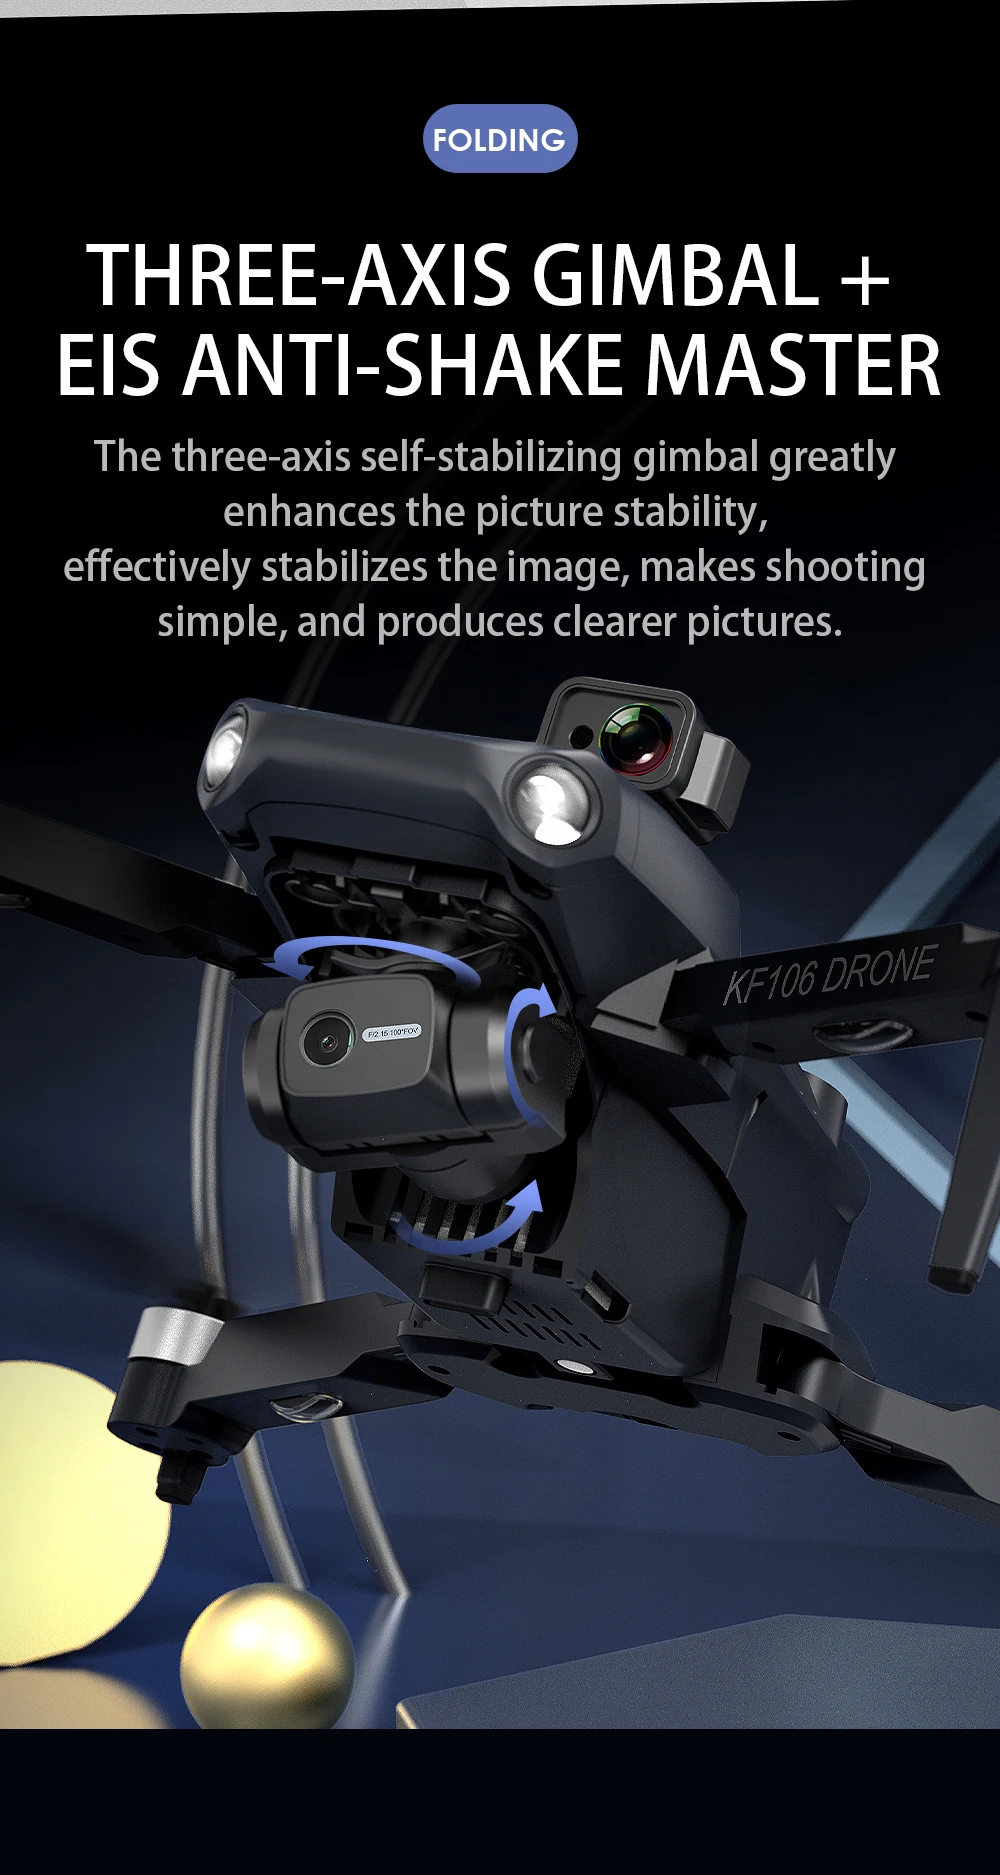 KFPLAN KF106 Drone, the three-axis self-stabilizing gimbal effectively stabilizes the image 